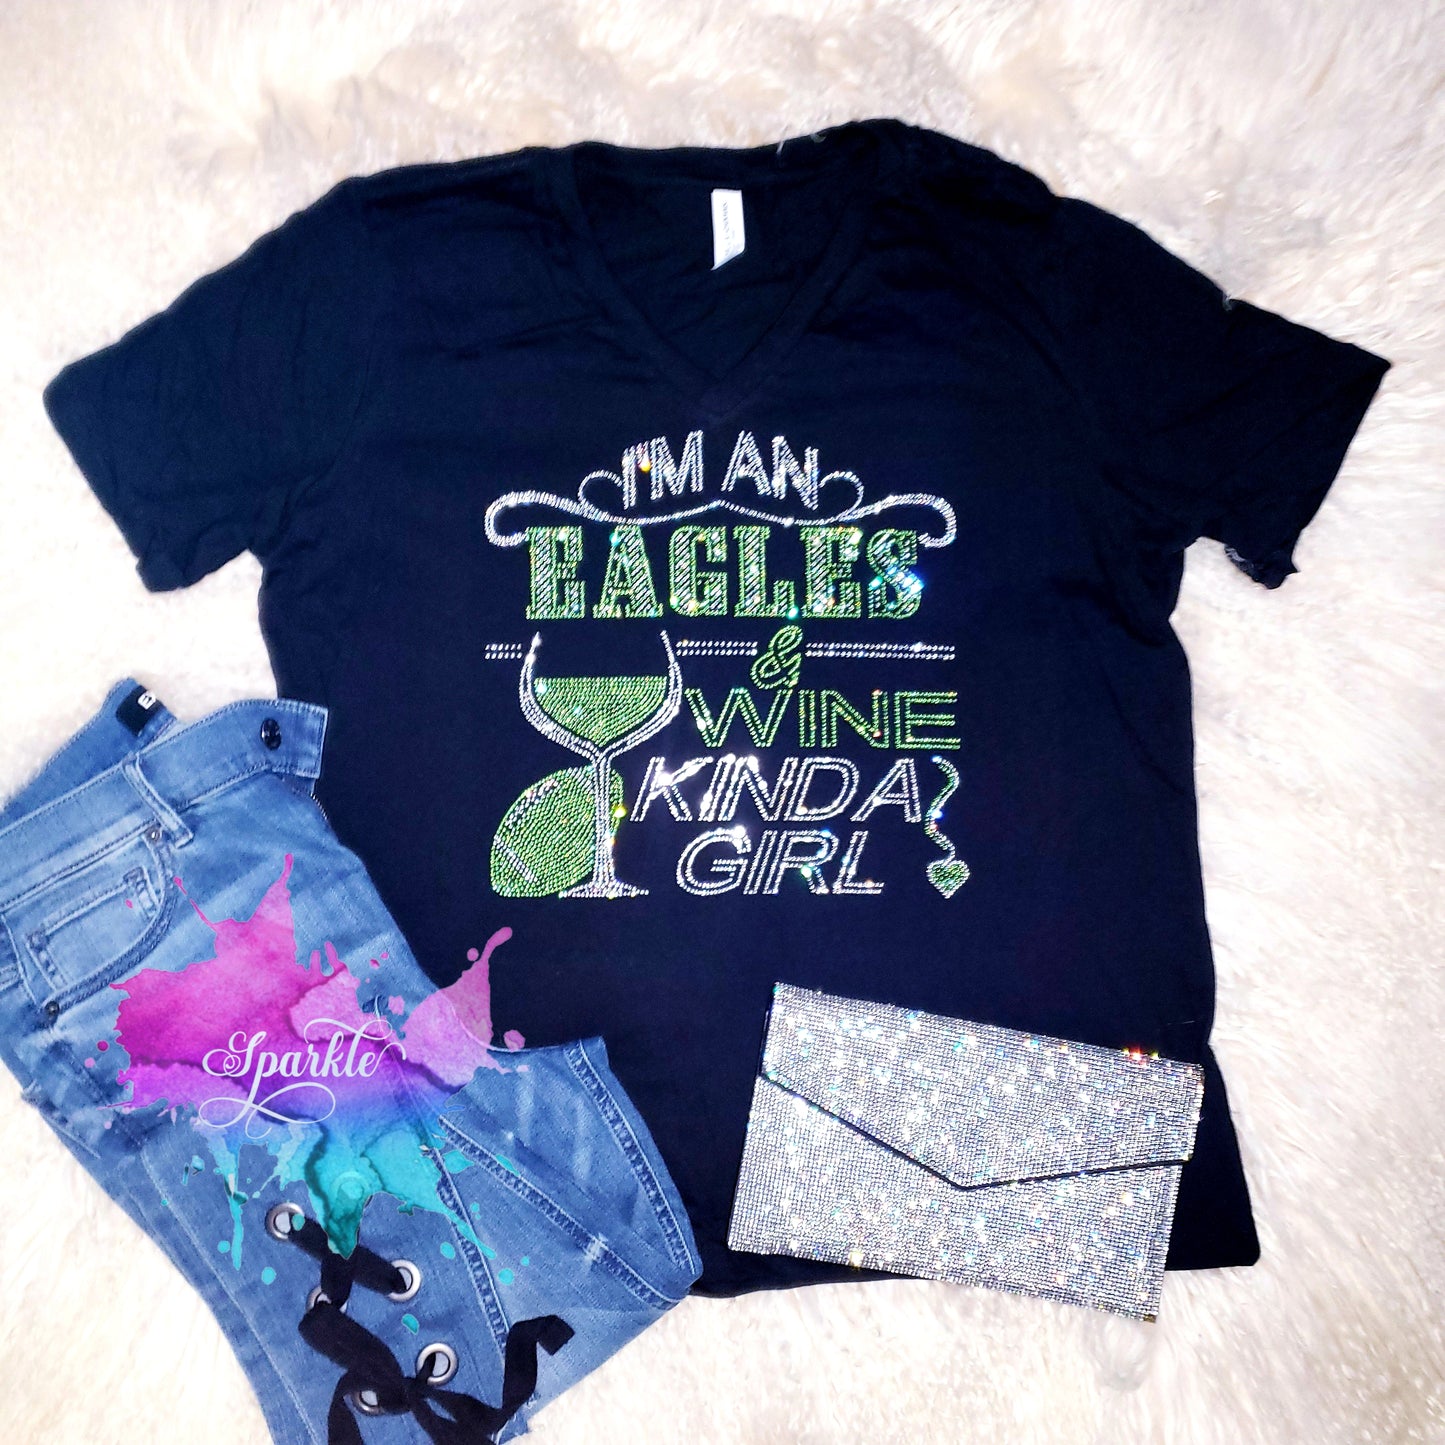 Eagles and Wine Crystallized Tee